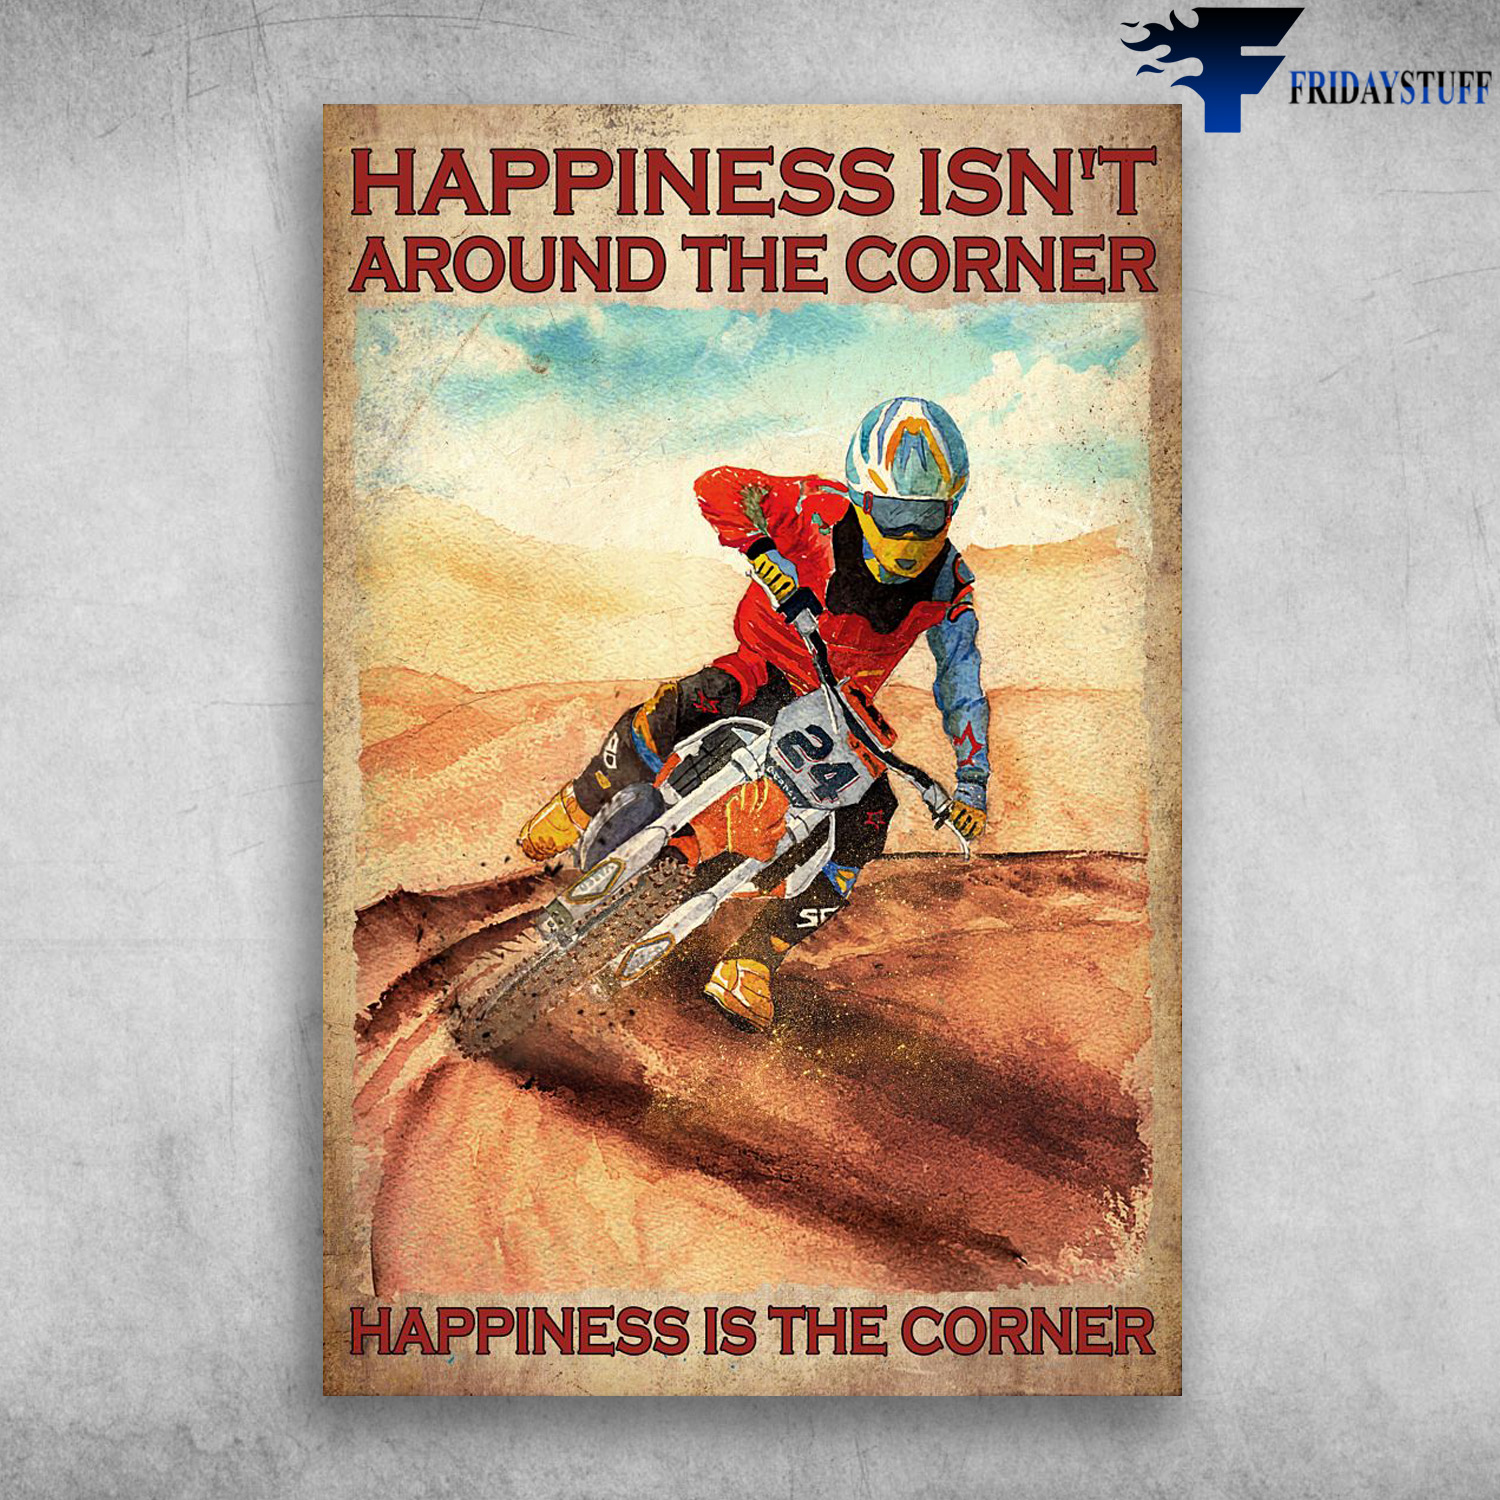 Motorcycling On The Desert - Happiness Isn't Around The Corner, Happiness Is The Corner